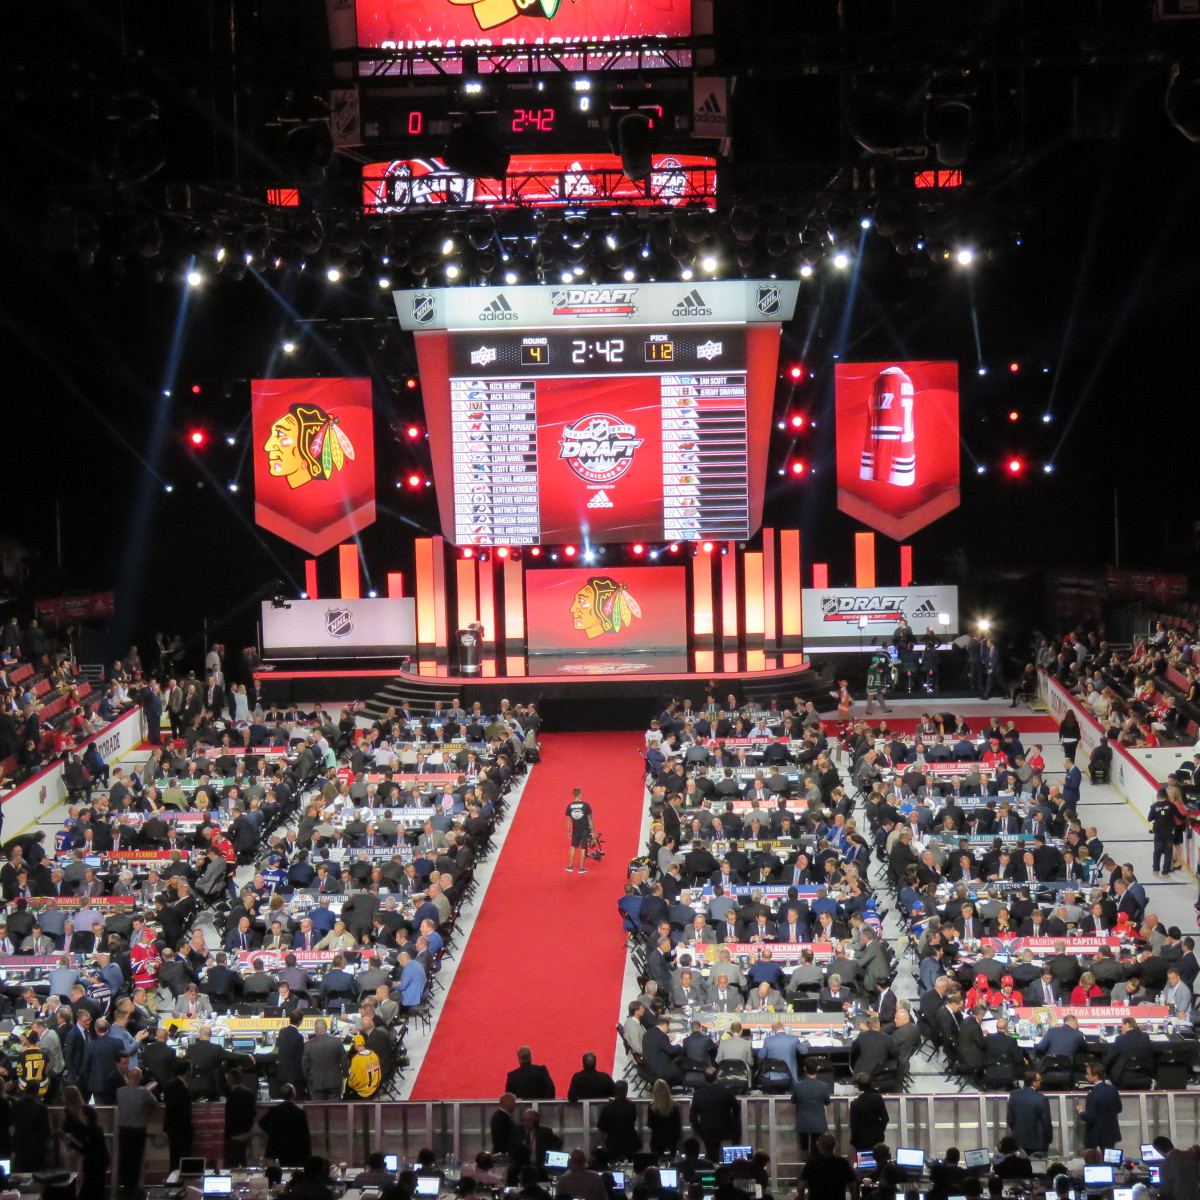 Photo of the NHL Draft floor, taken by me.